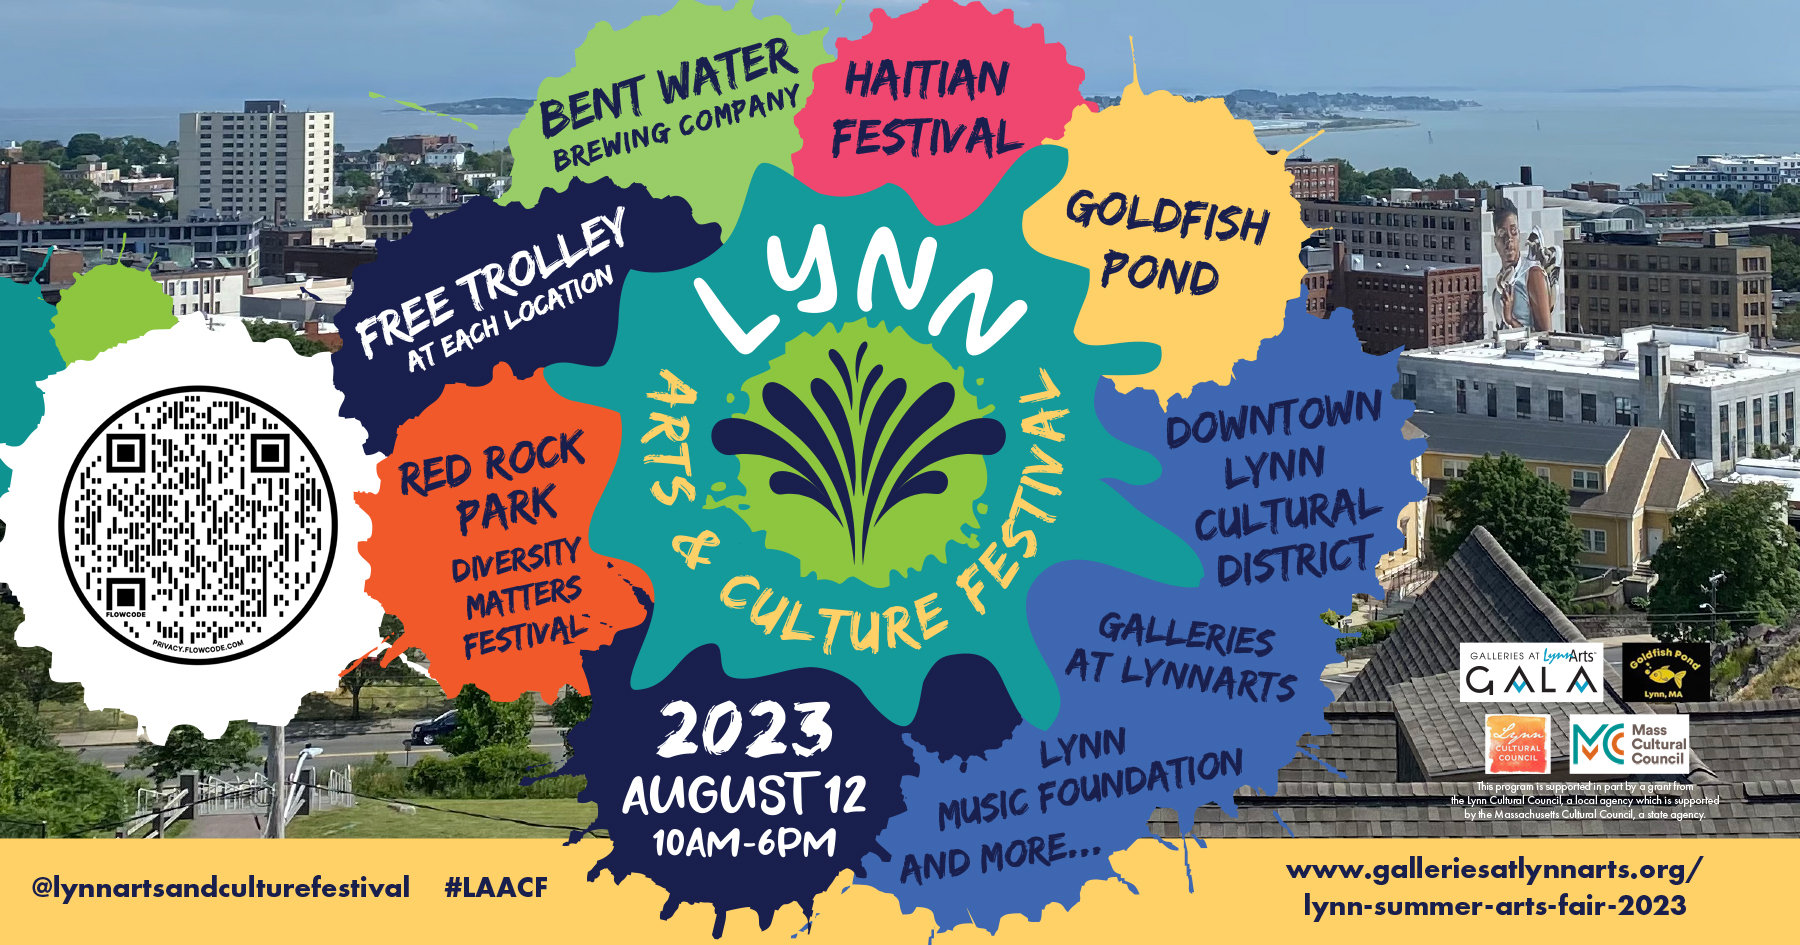 A flyer for the linn arts and culture festival.